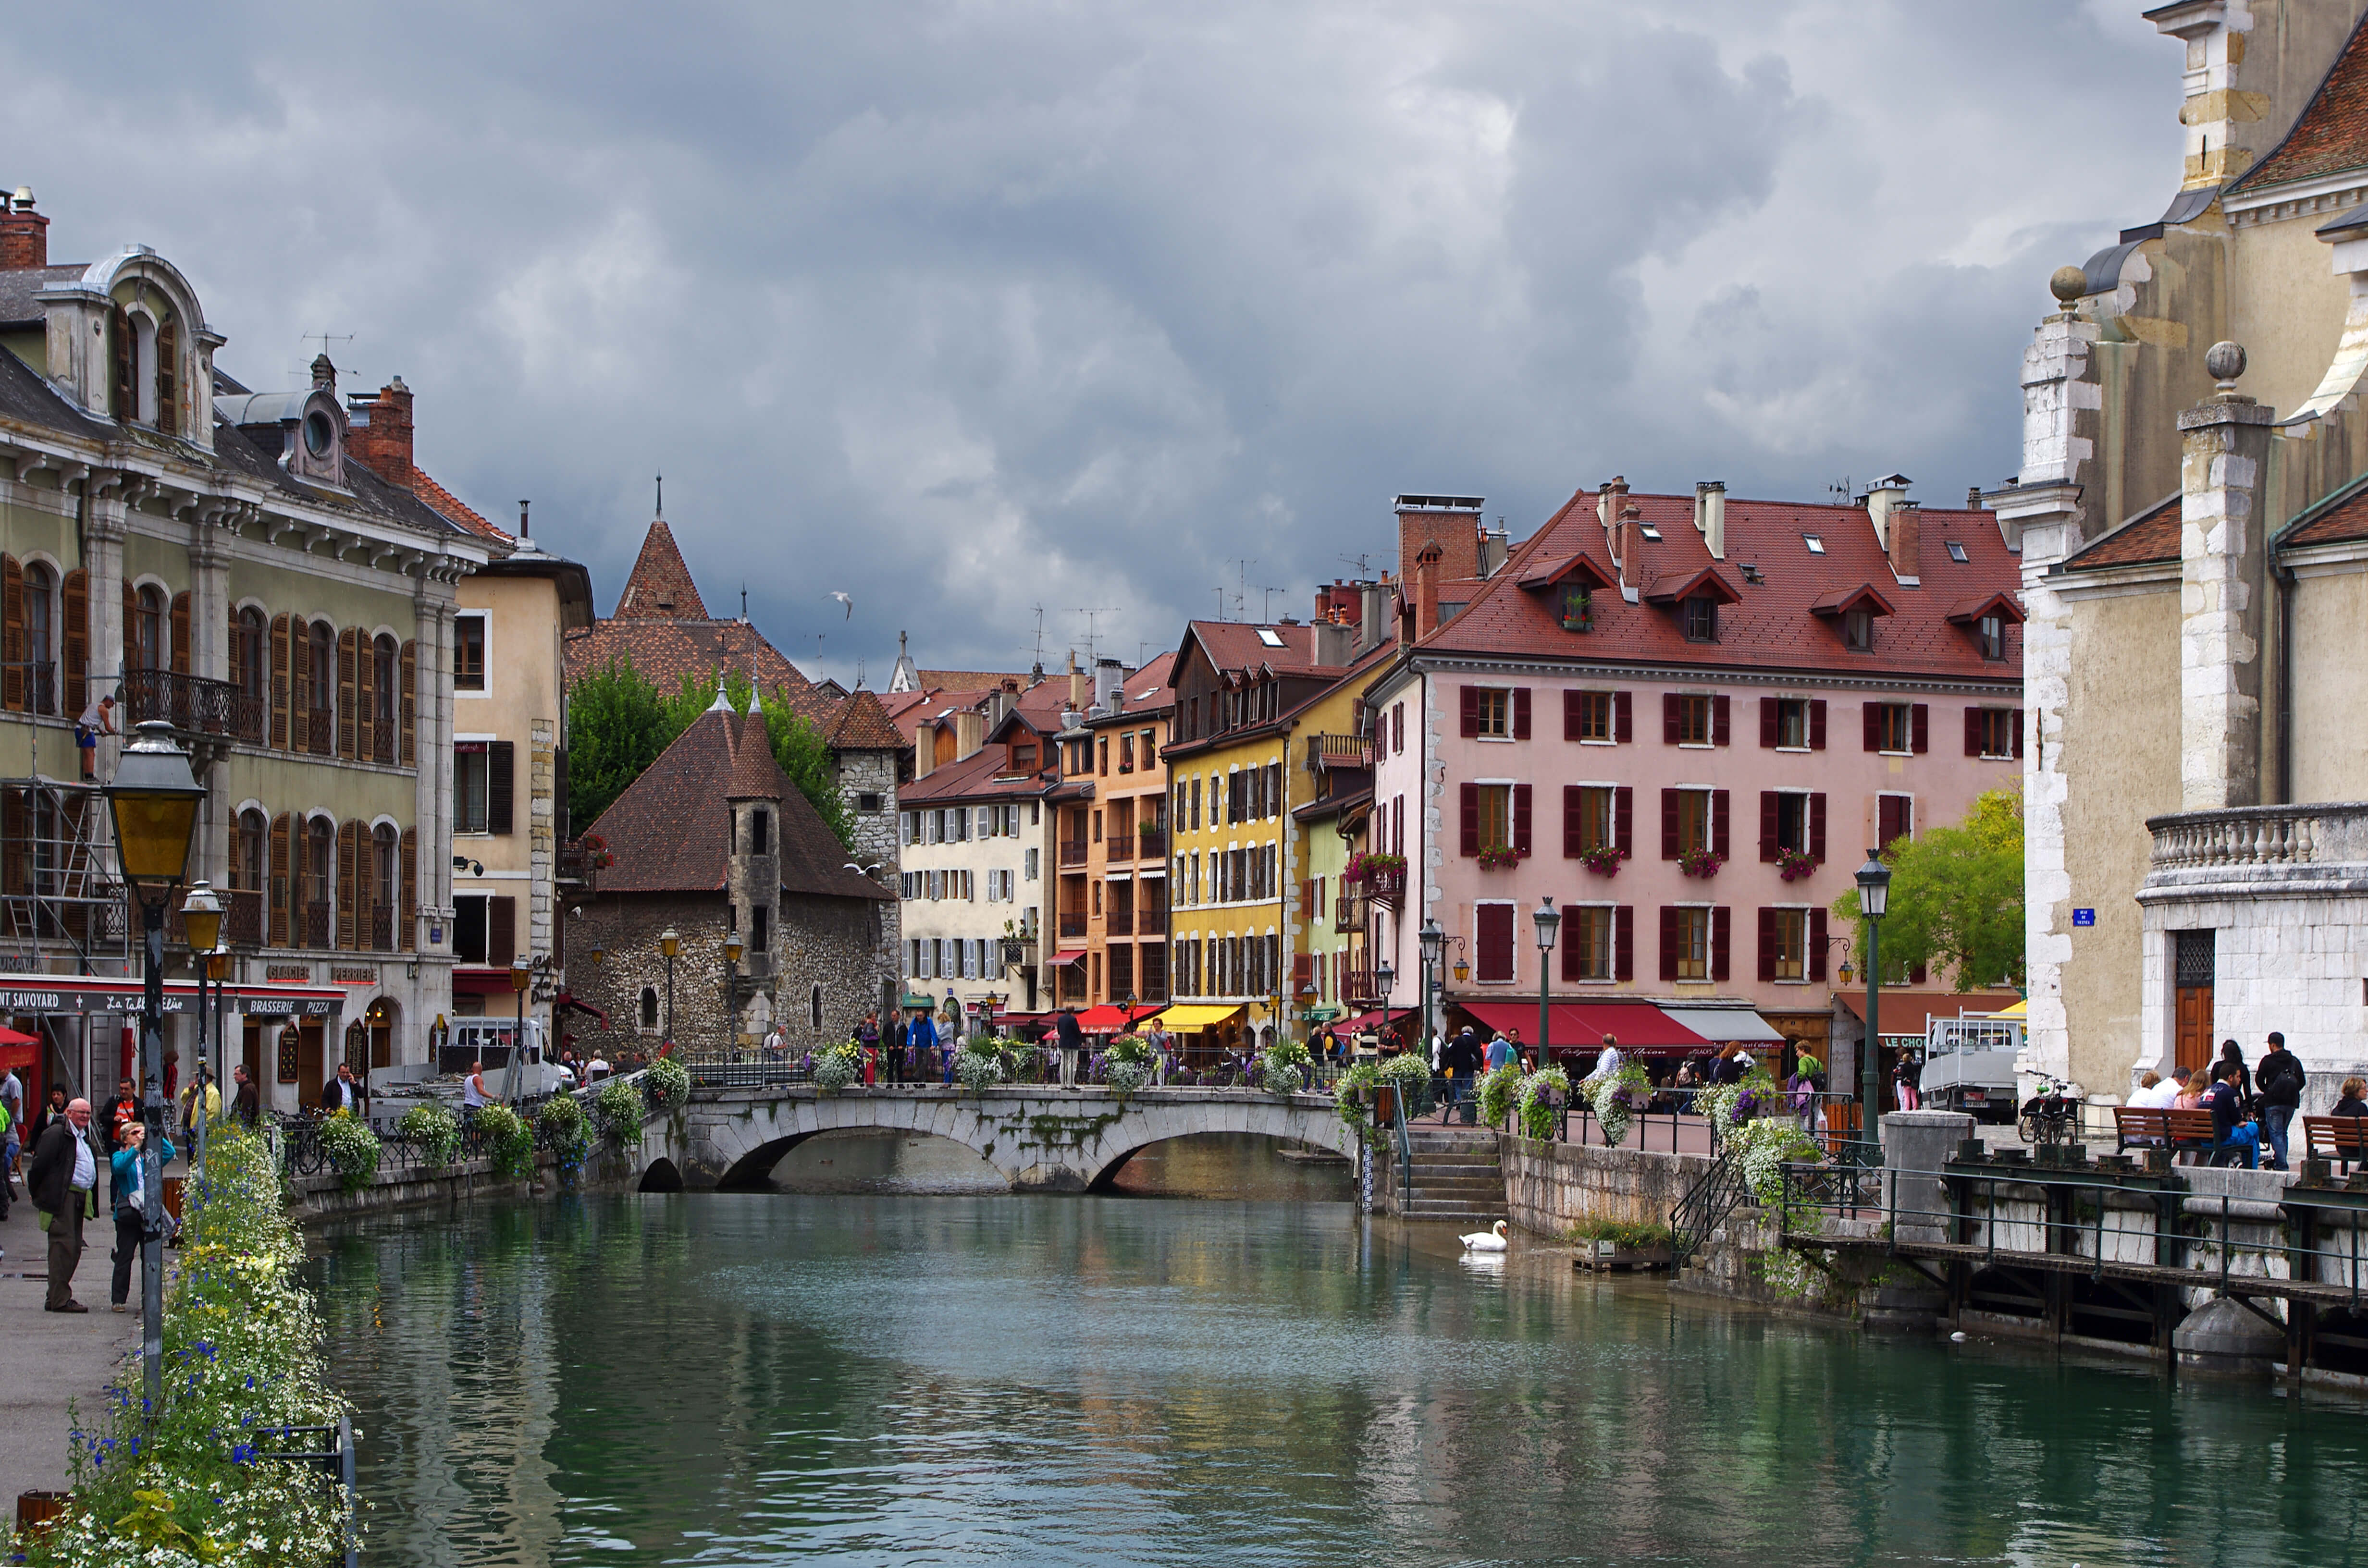 A real-life fairytale in Annecy, France
